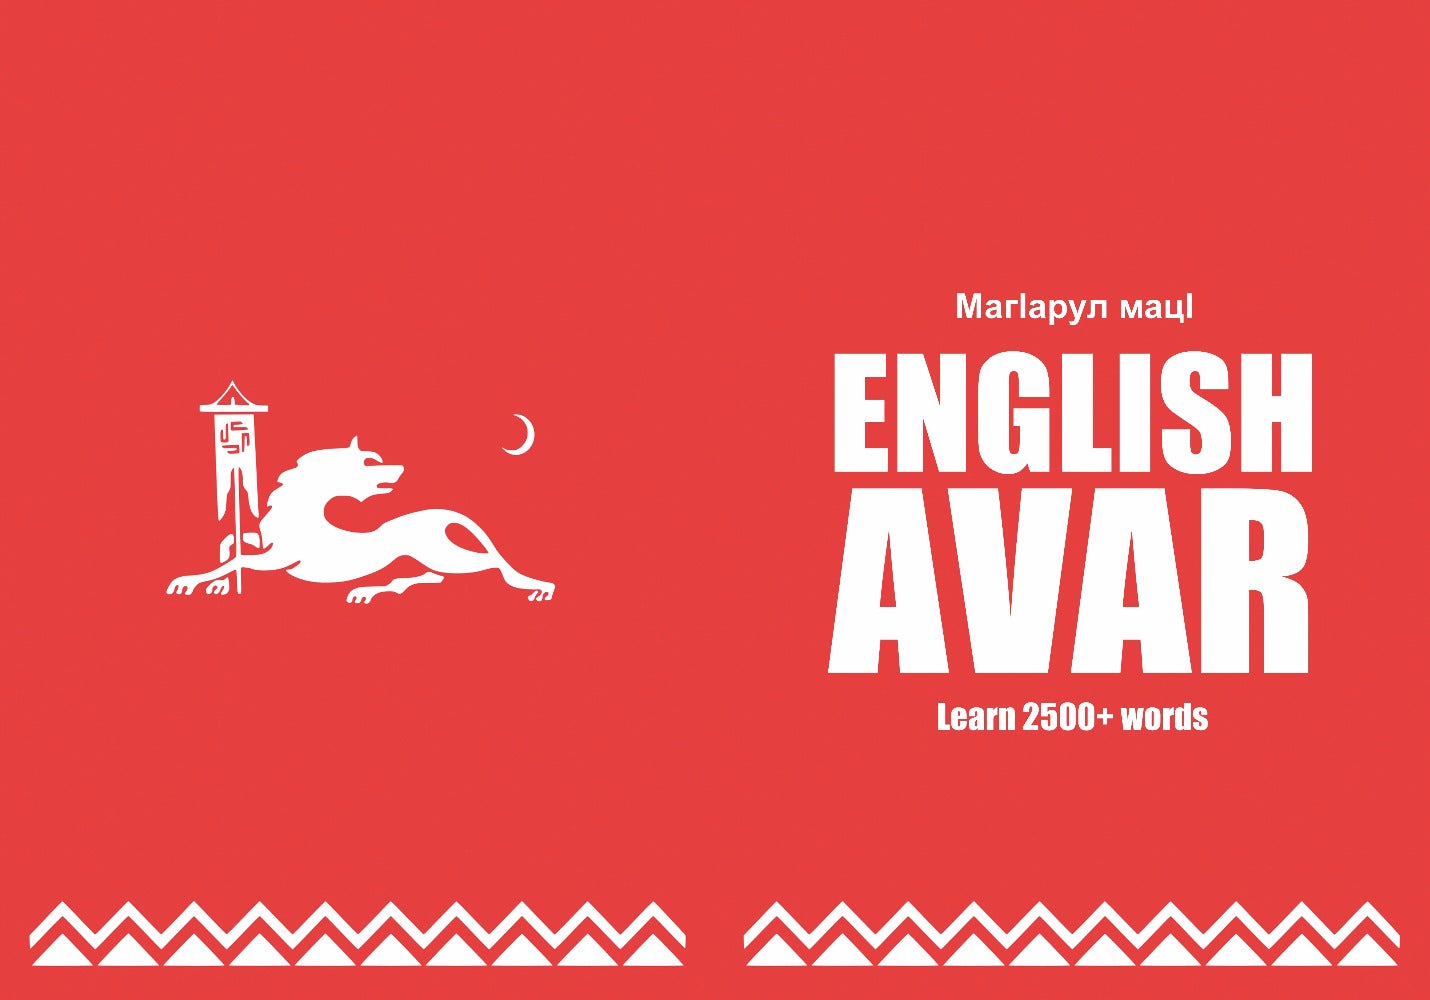 Avar language learning notebook cover